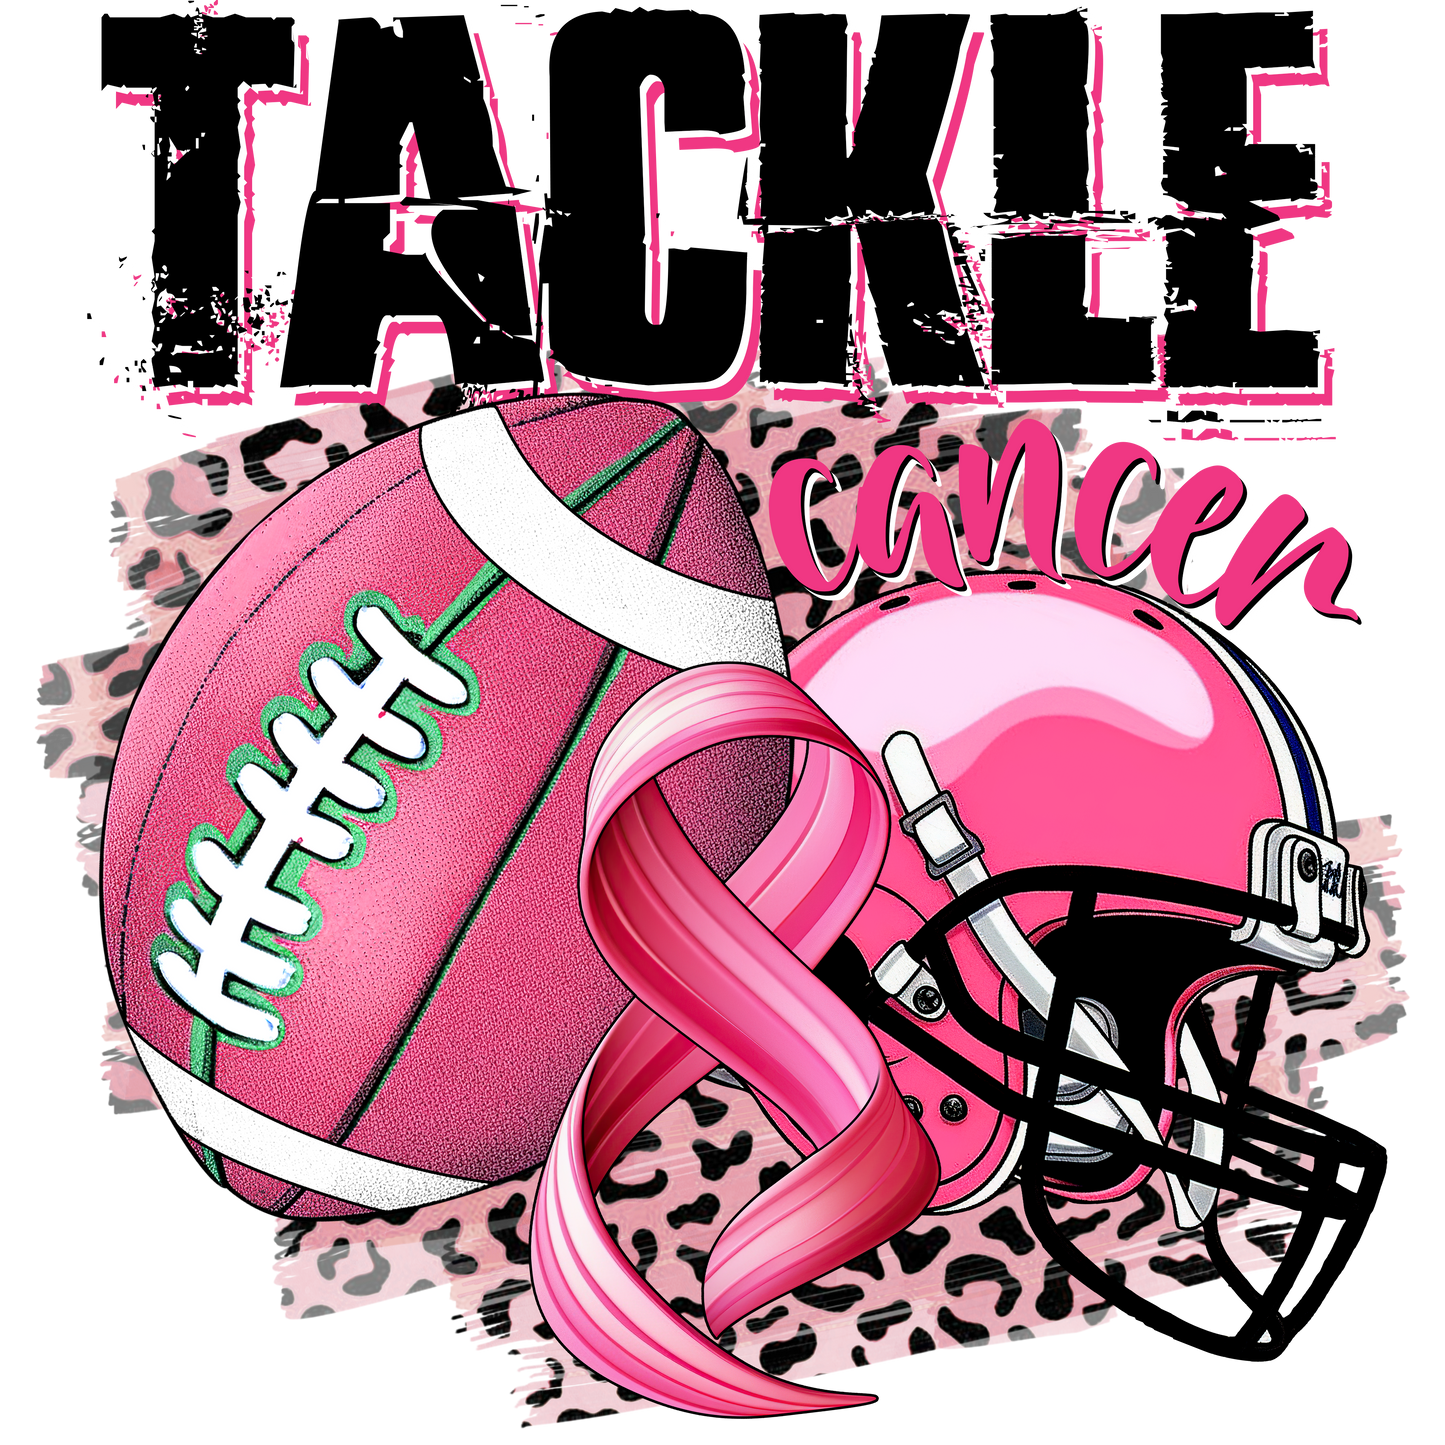 BREAST CANCER, TACKLE CANCER